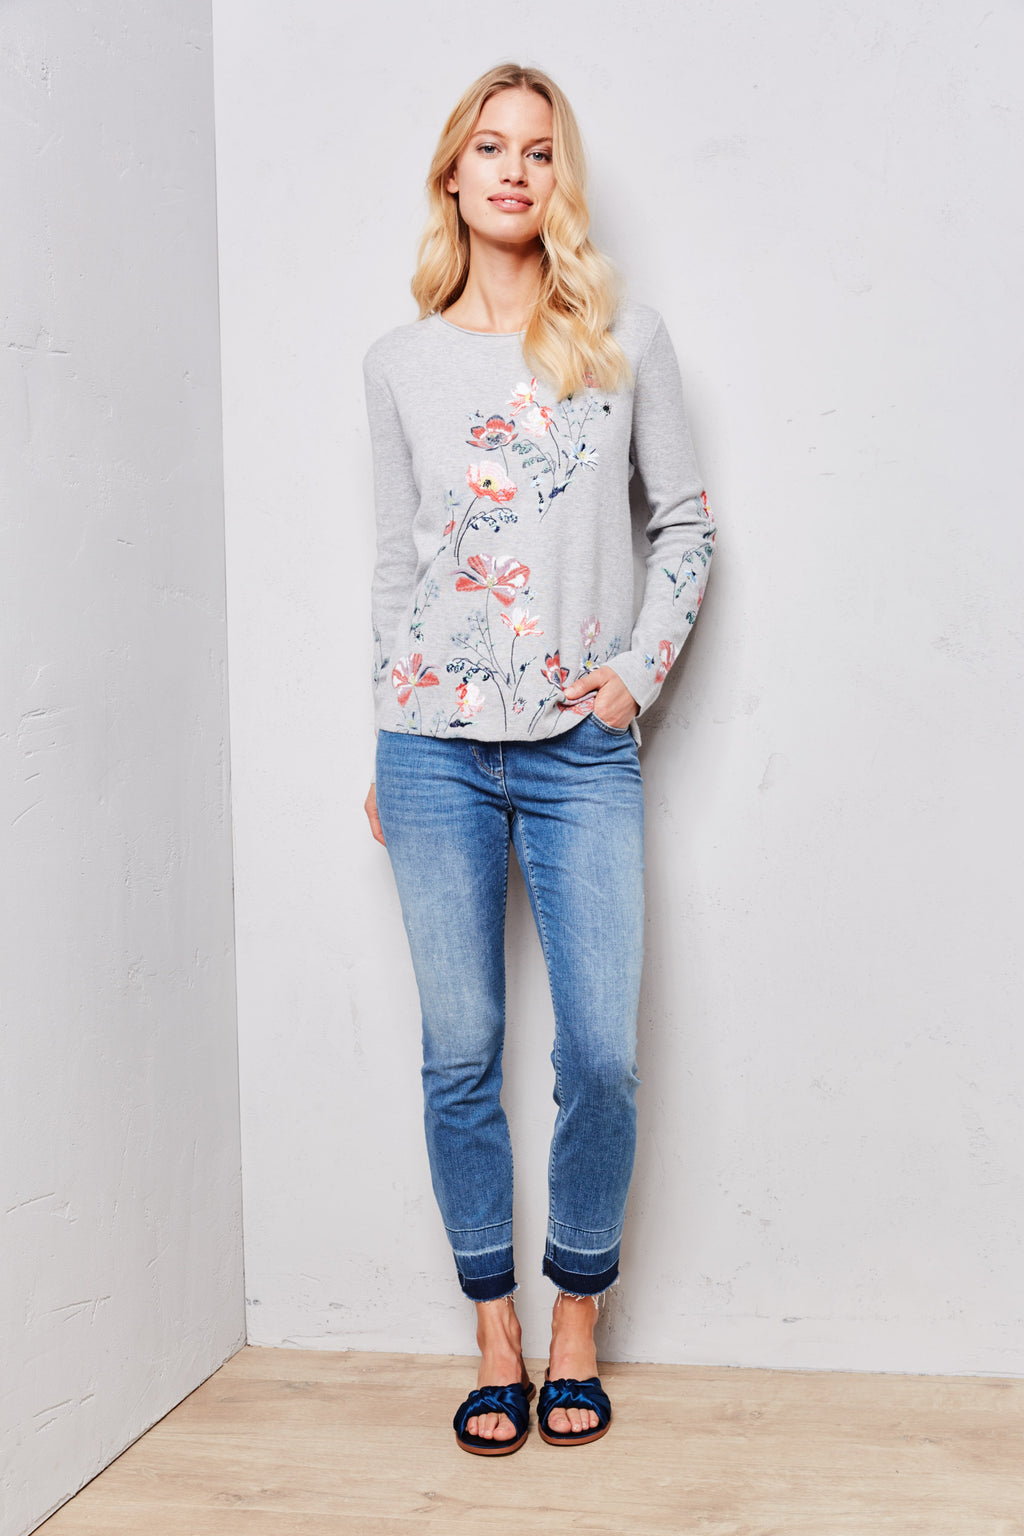 Gerry Weber Floral Embroidered Sweater At Jophiel 